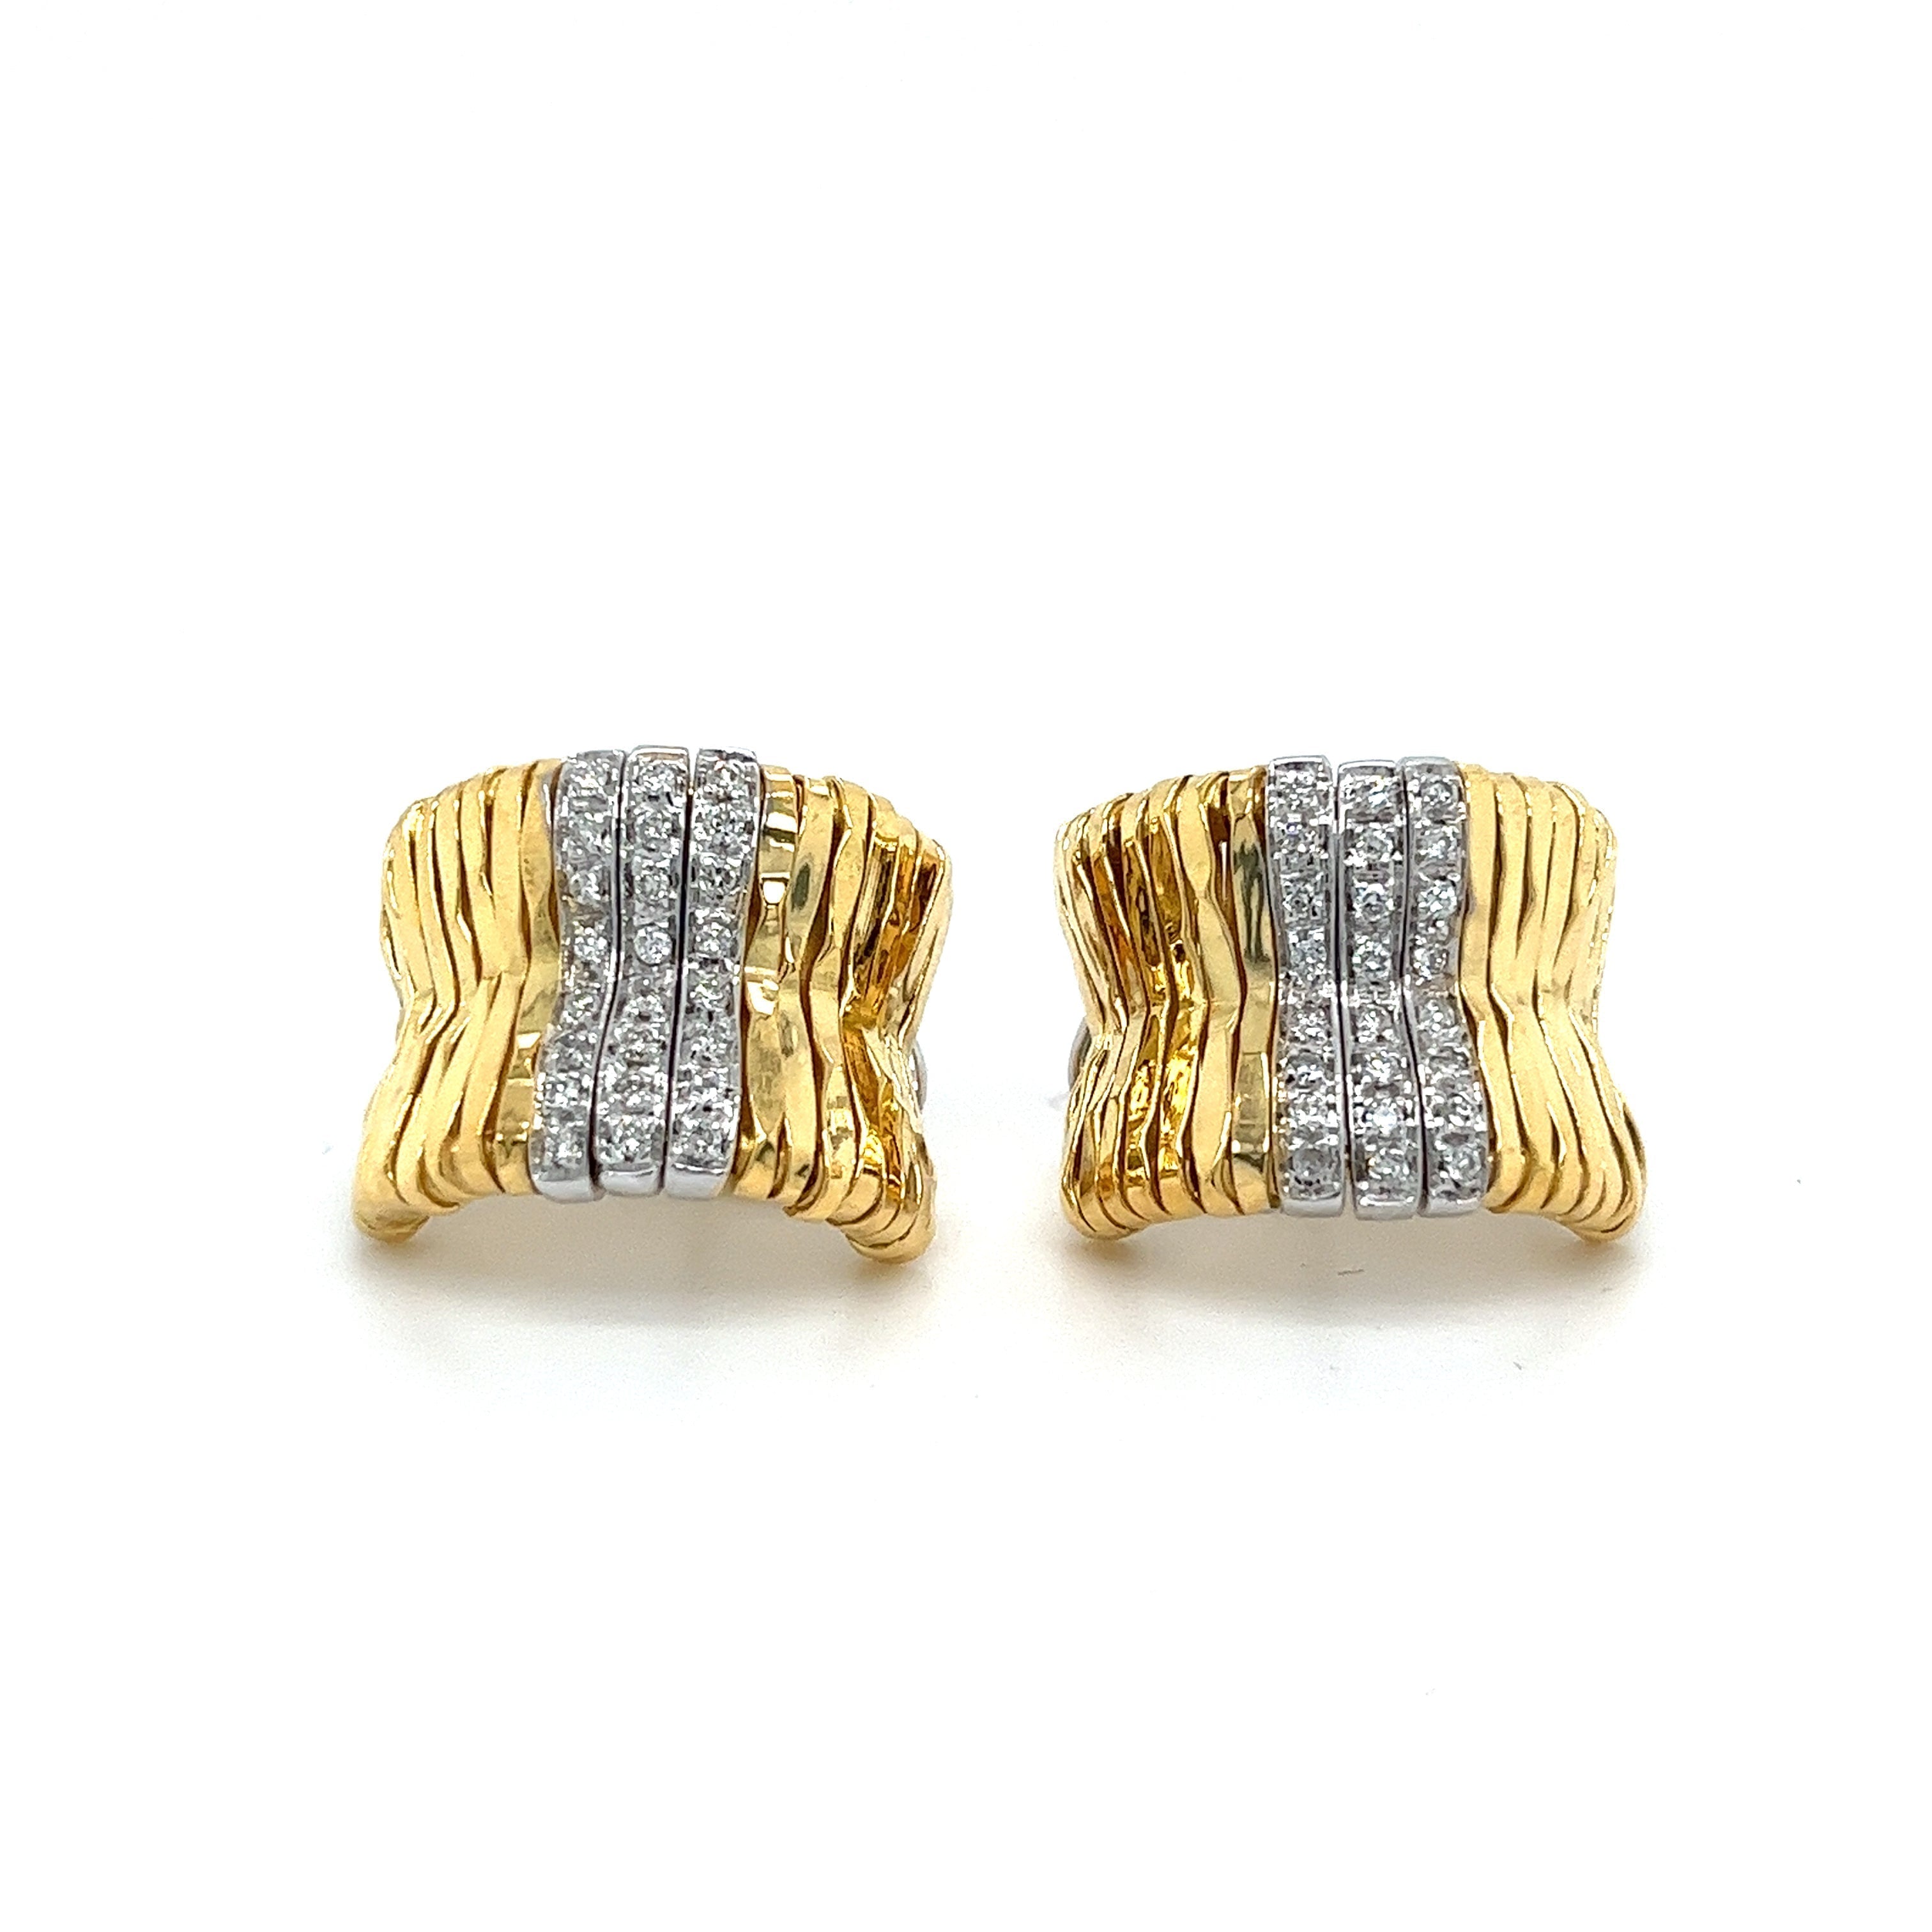 Orlandini Signed 18K Two Tone Gold Ribbed Bar Hug Hoop Earrings with Round Cut Diamonds-Earrings-ASSAY